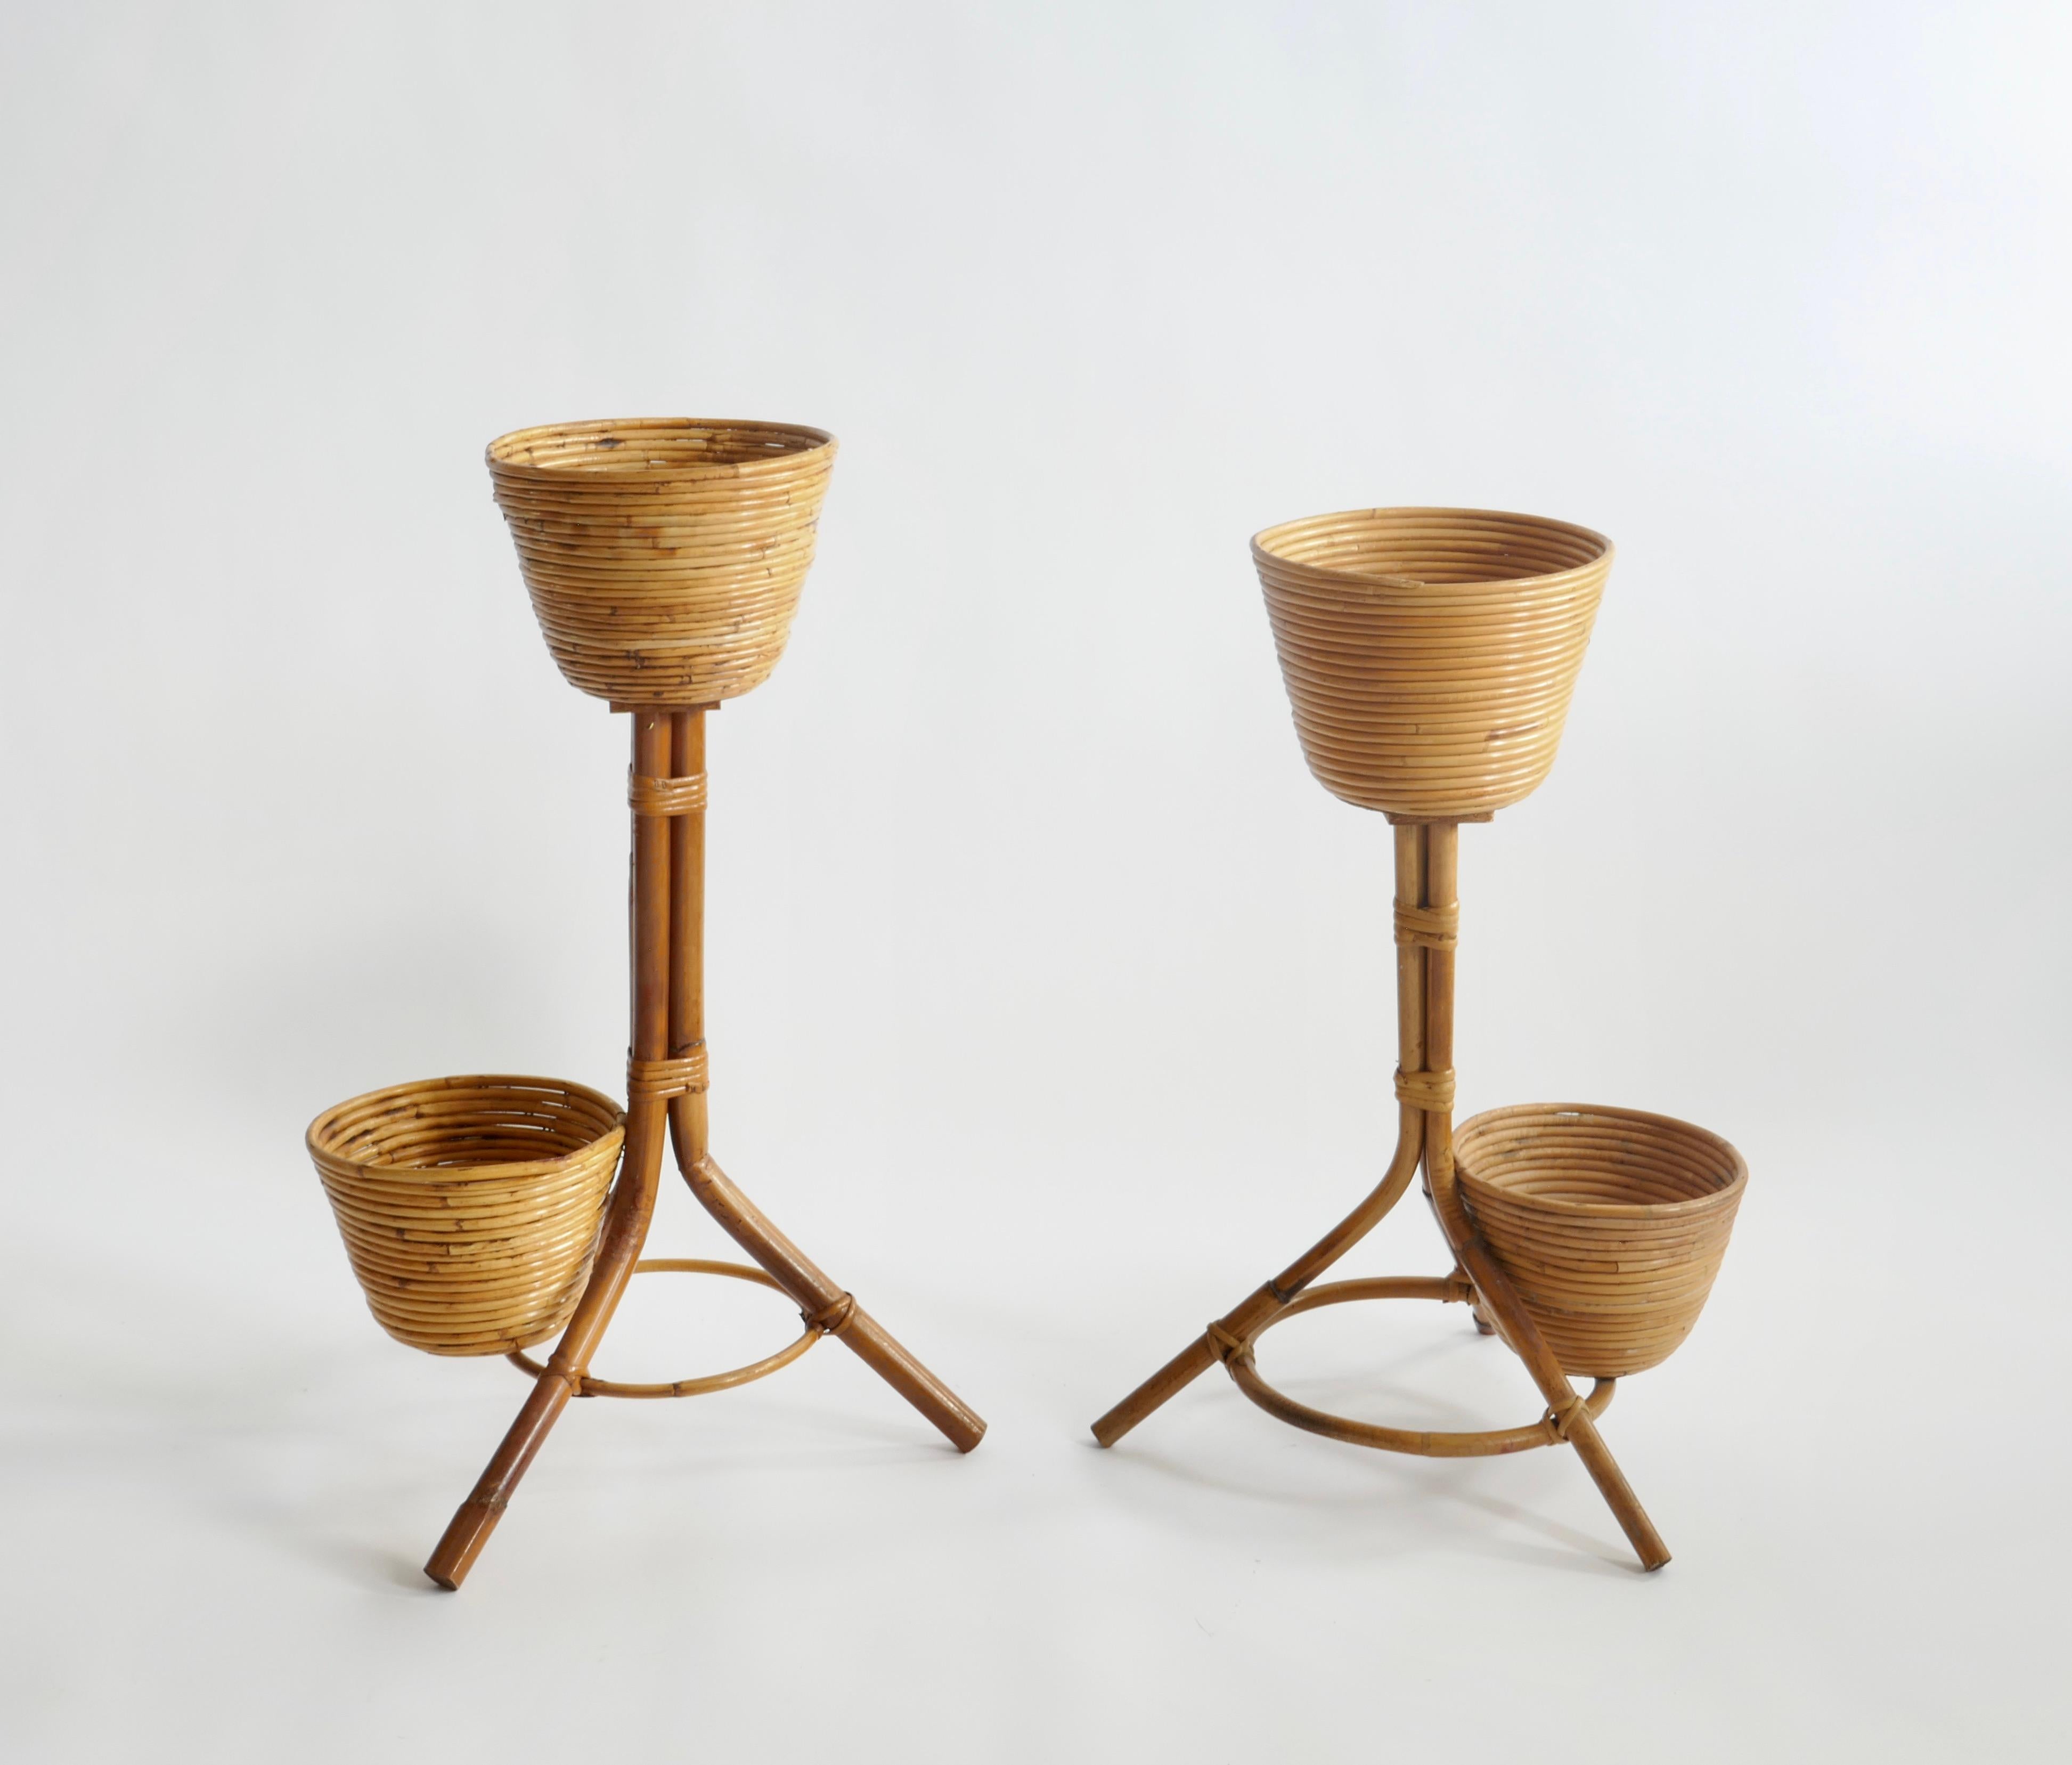 Italian Set of 2 Bamboo and Rattan Plant Holders, Italy 1950s For Sale